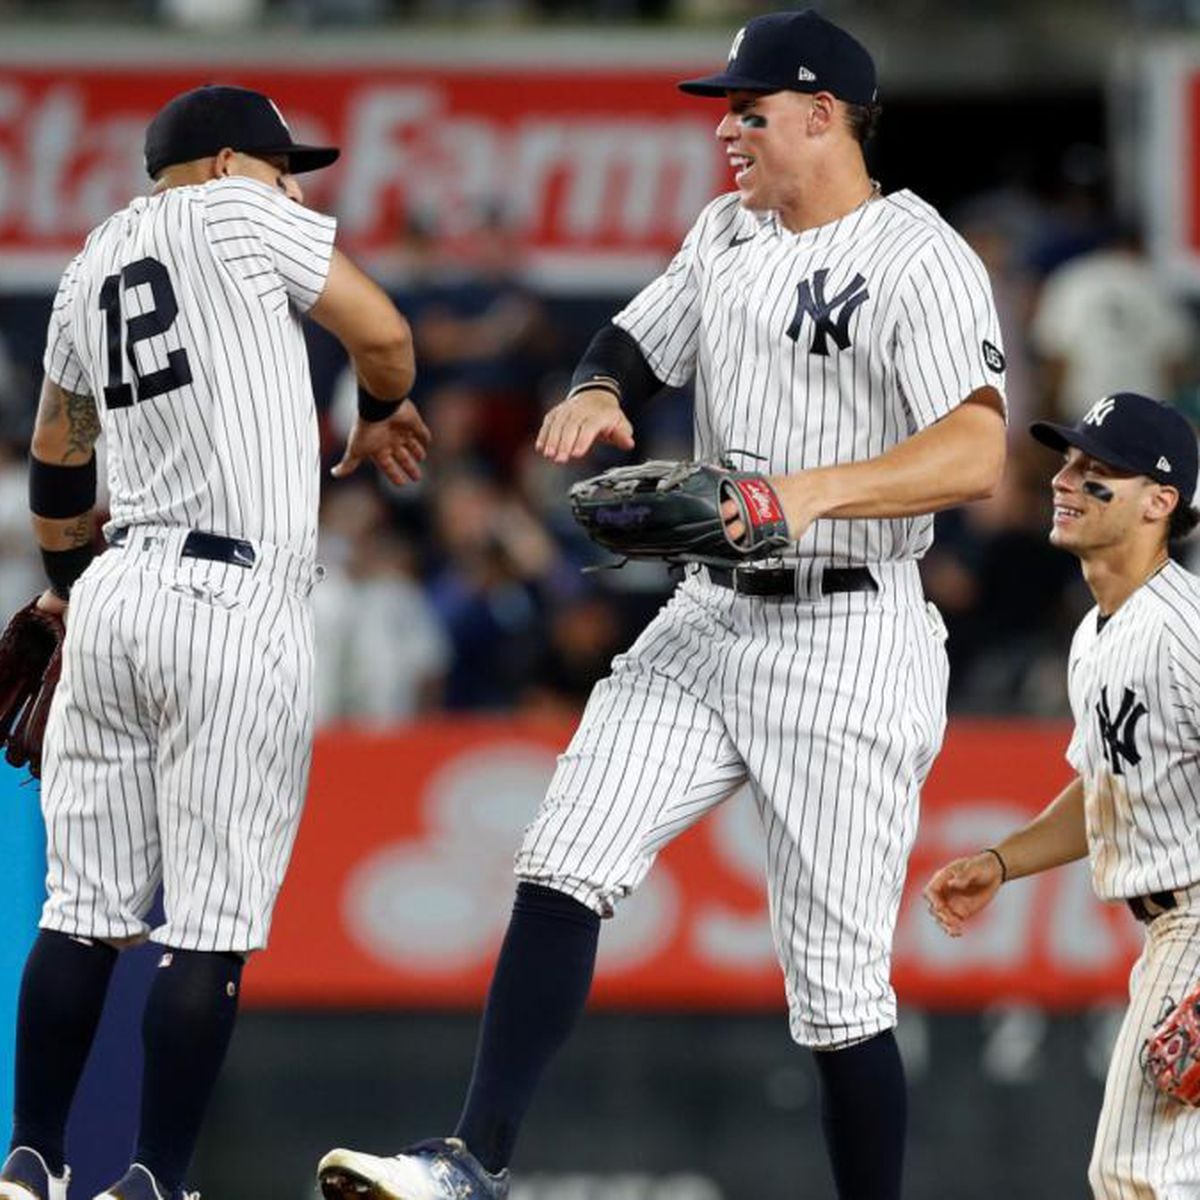 Yankees score runs in final three innings for 4-1 victory over Dodgers